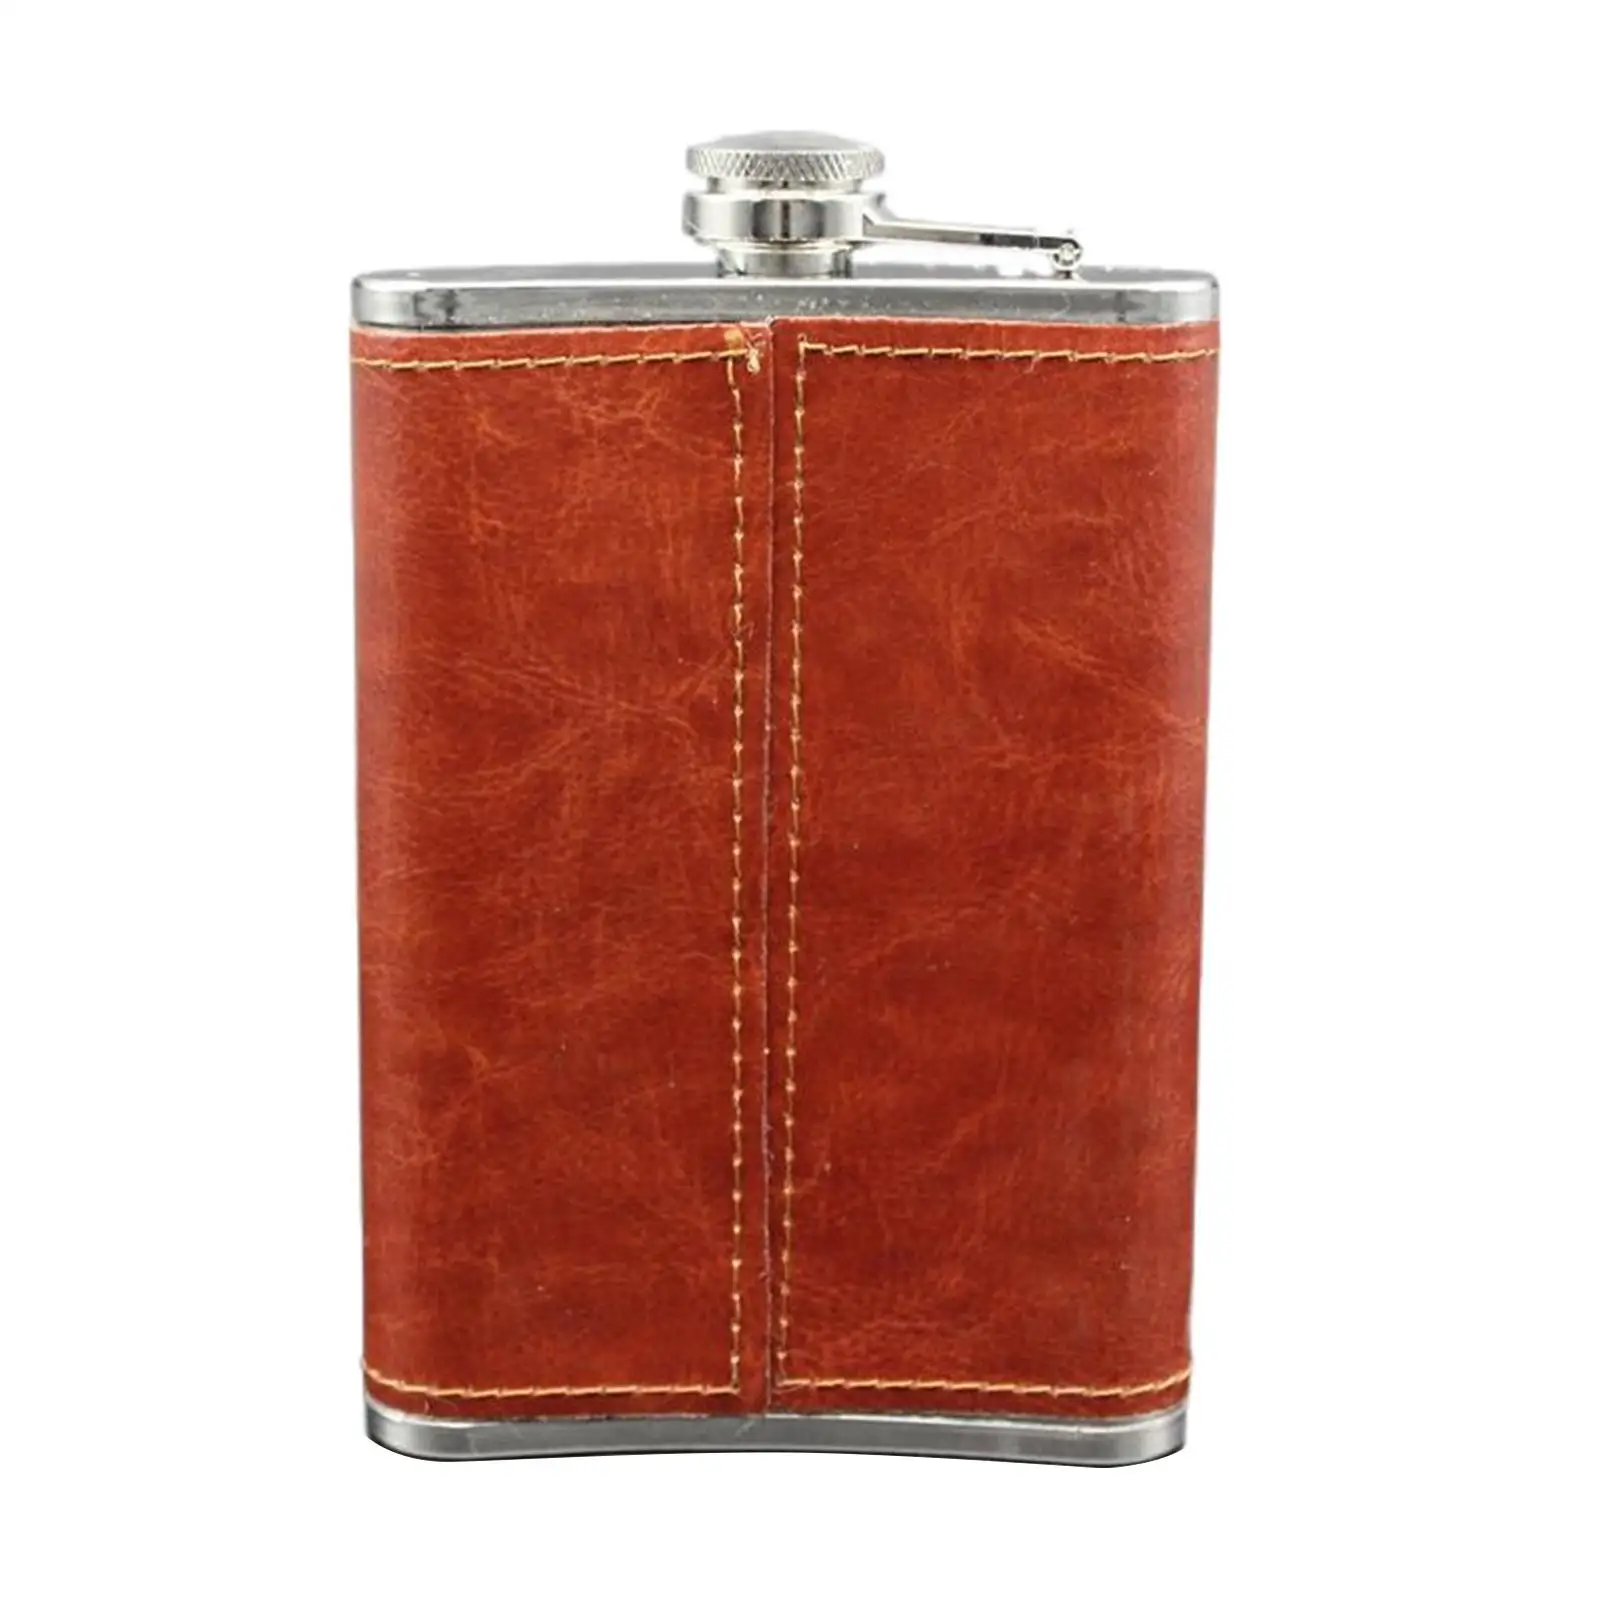 U Typed Hip Flask Classic Sealed Portable Wine Bottle Liquor Pocket Drinkware for Fishing Home Goods Camping Drinker Hunting